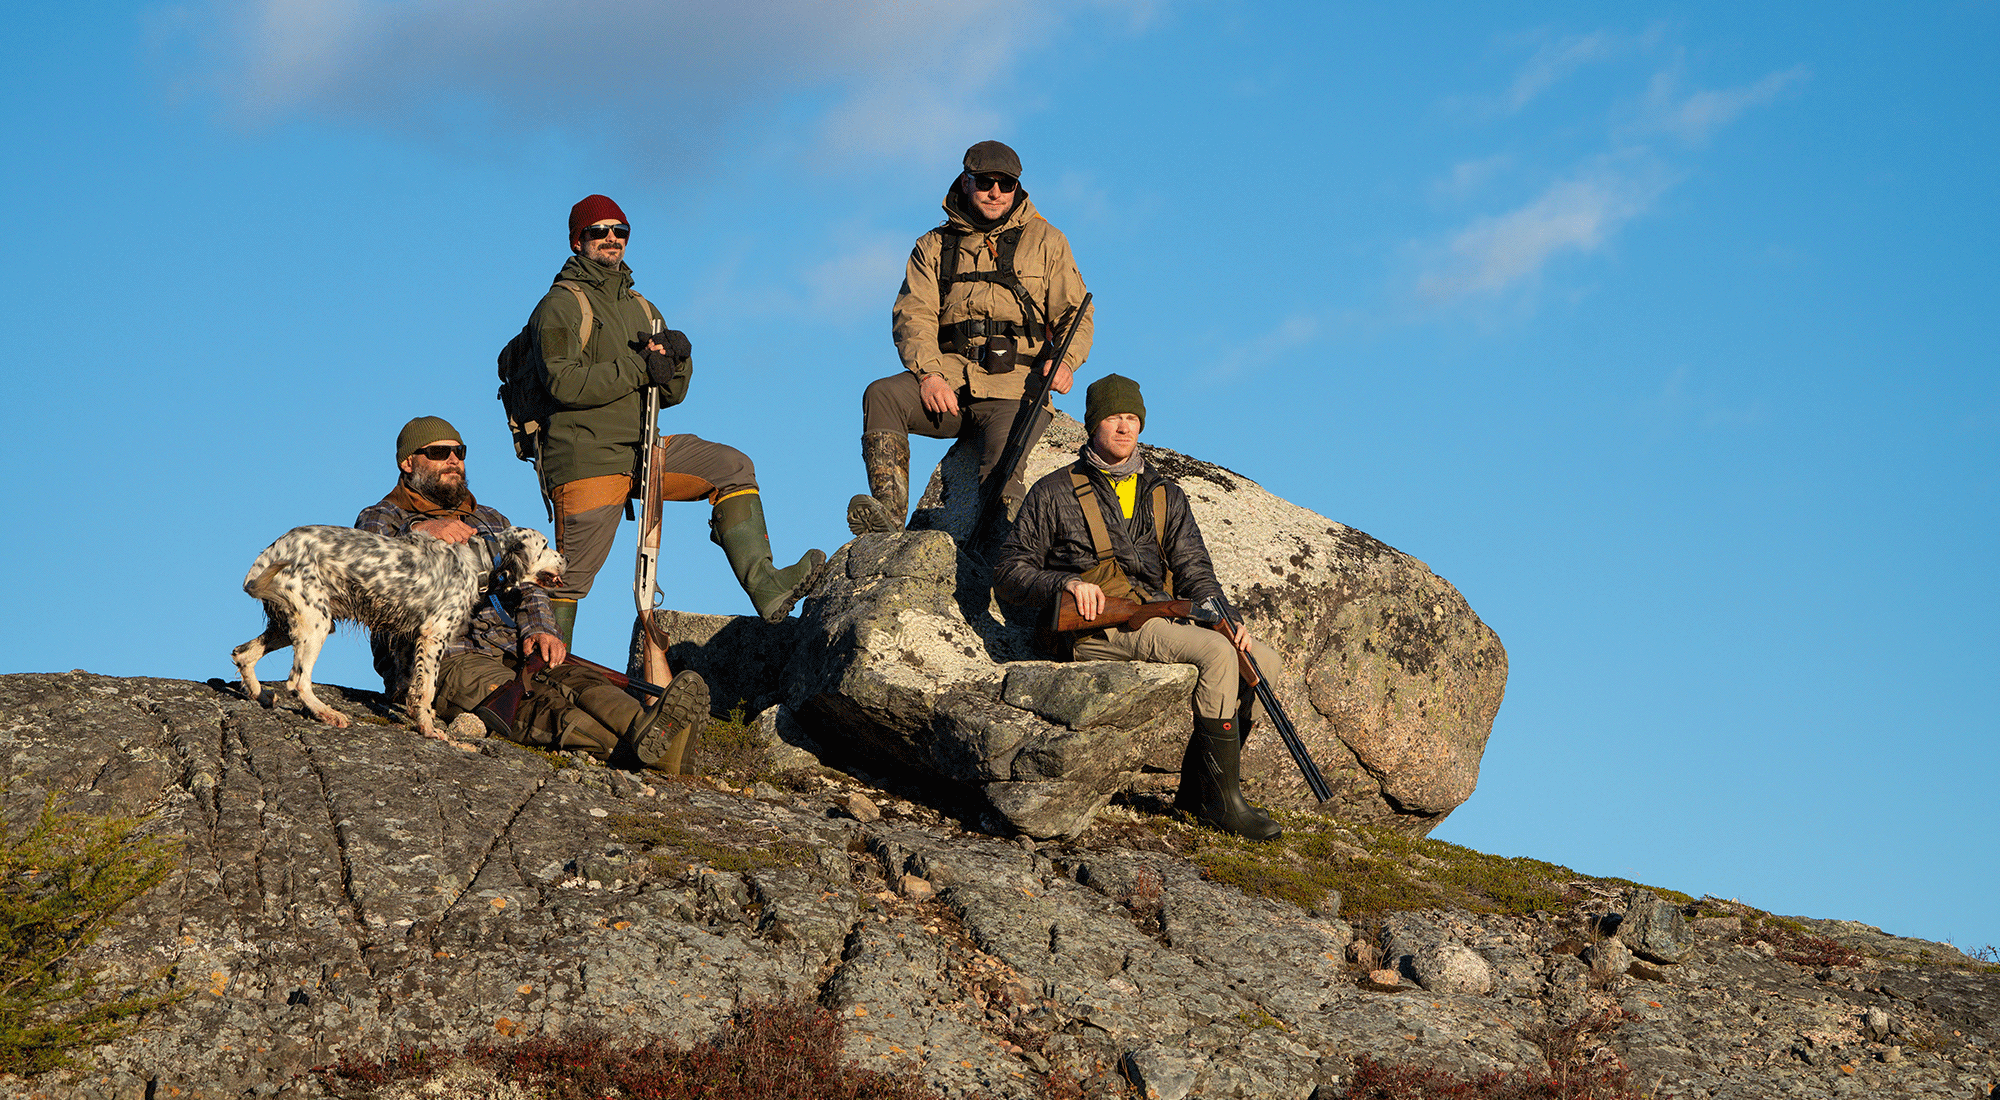 Newfoundland Part 1 - Tracking partridge with pointer dogs